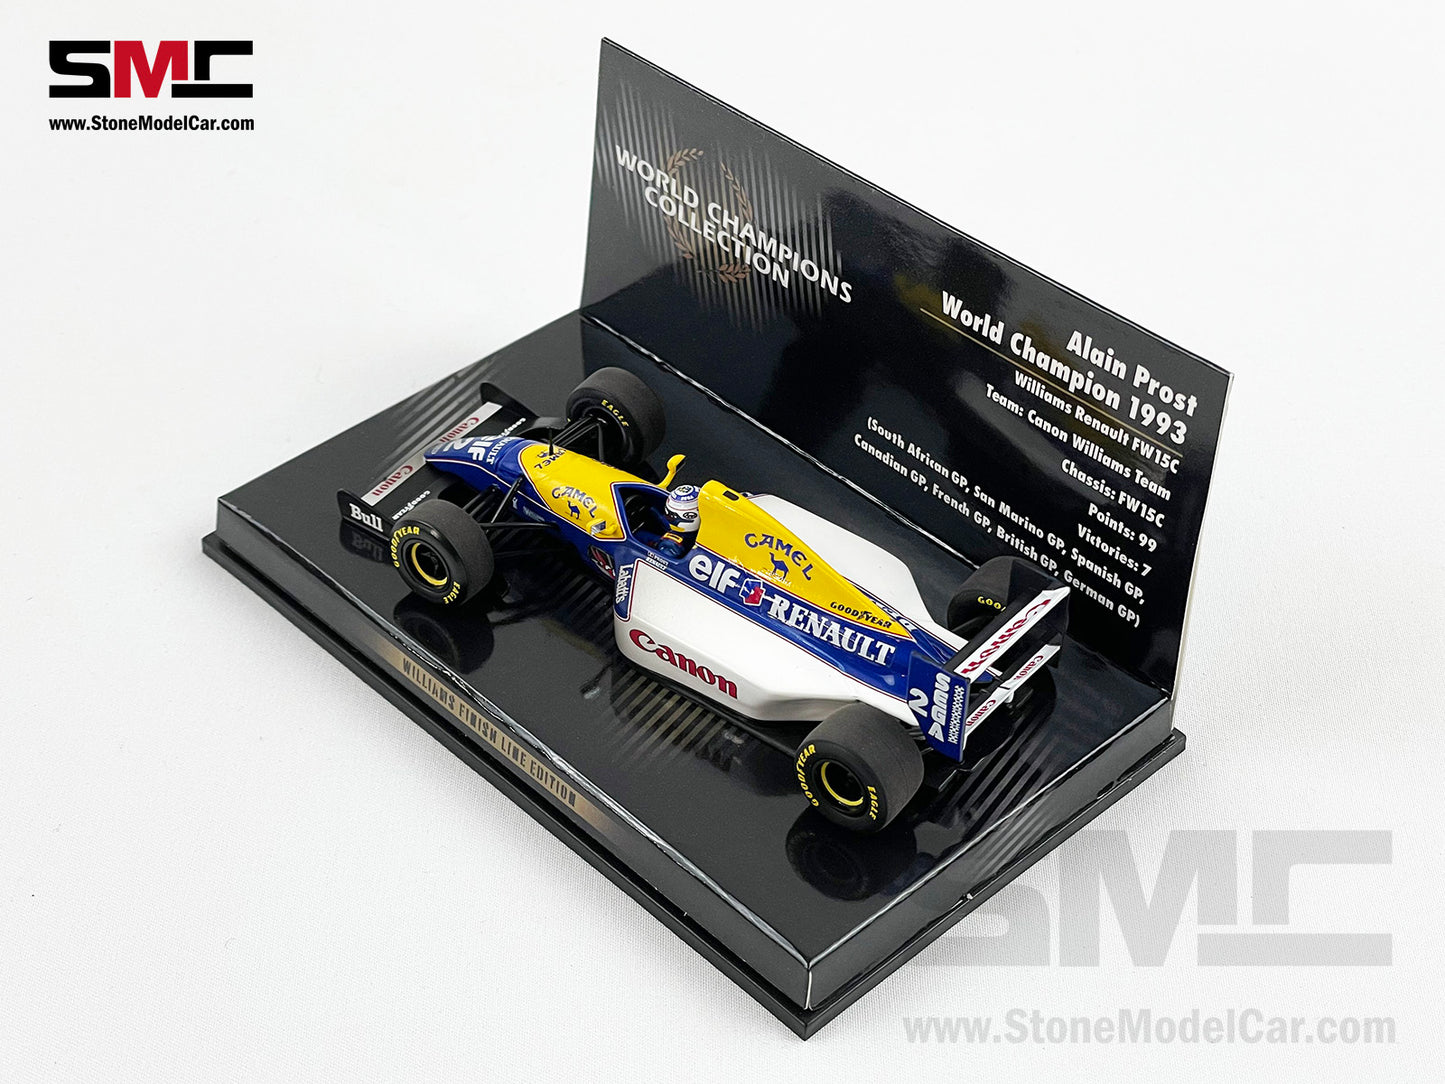 Williams F1 FW15C #2 Alain Prost 1993 World Champion 1:43 MINICHAMPS with CAMEL Decal